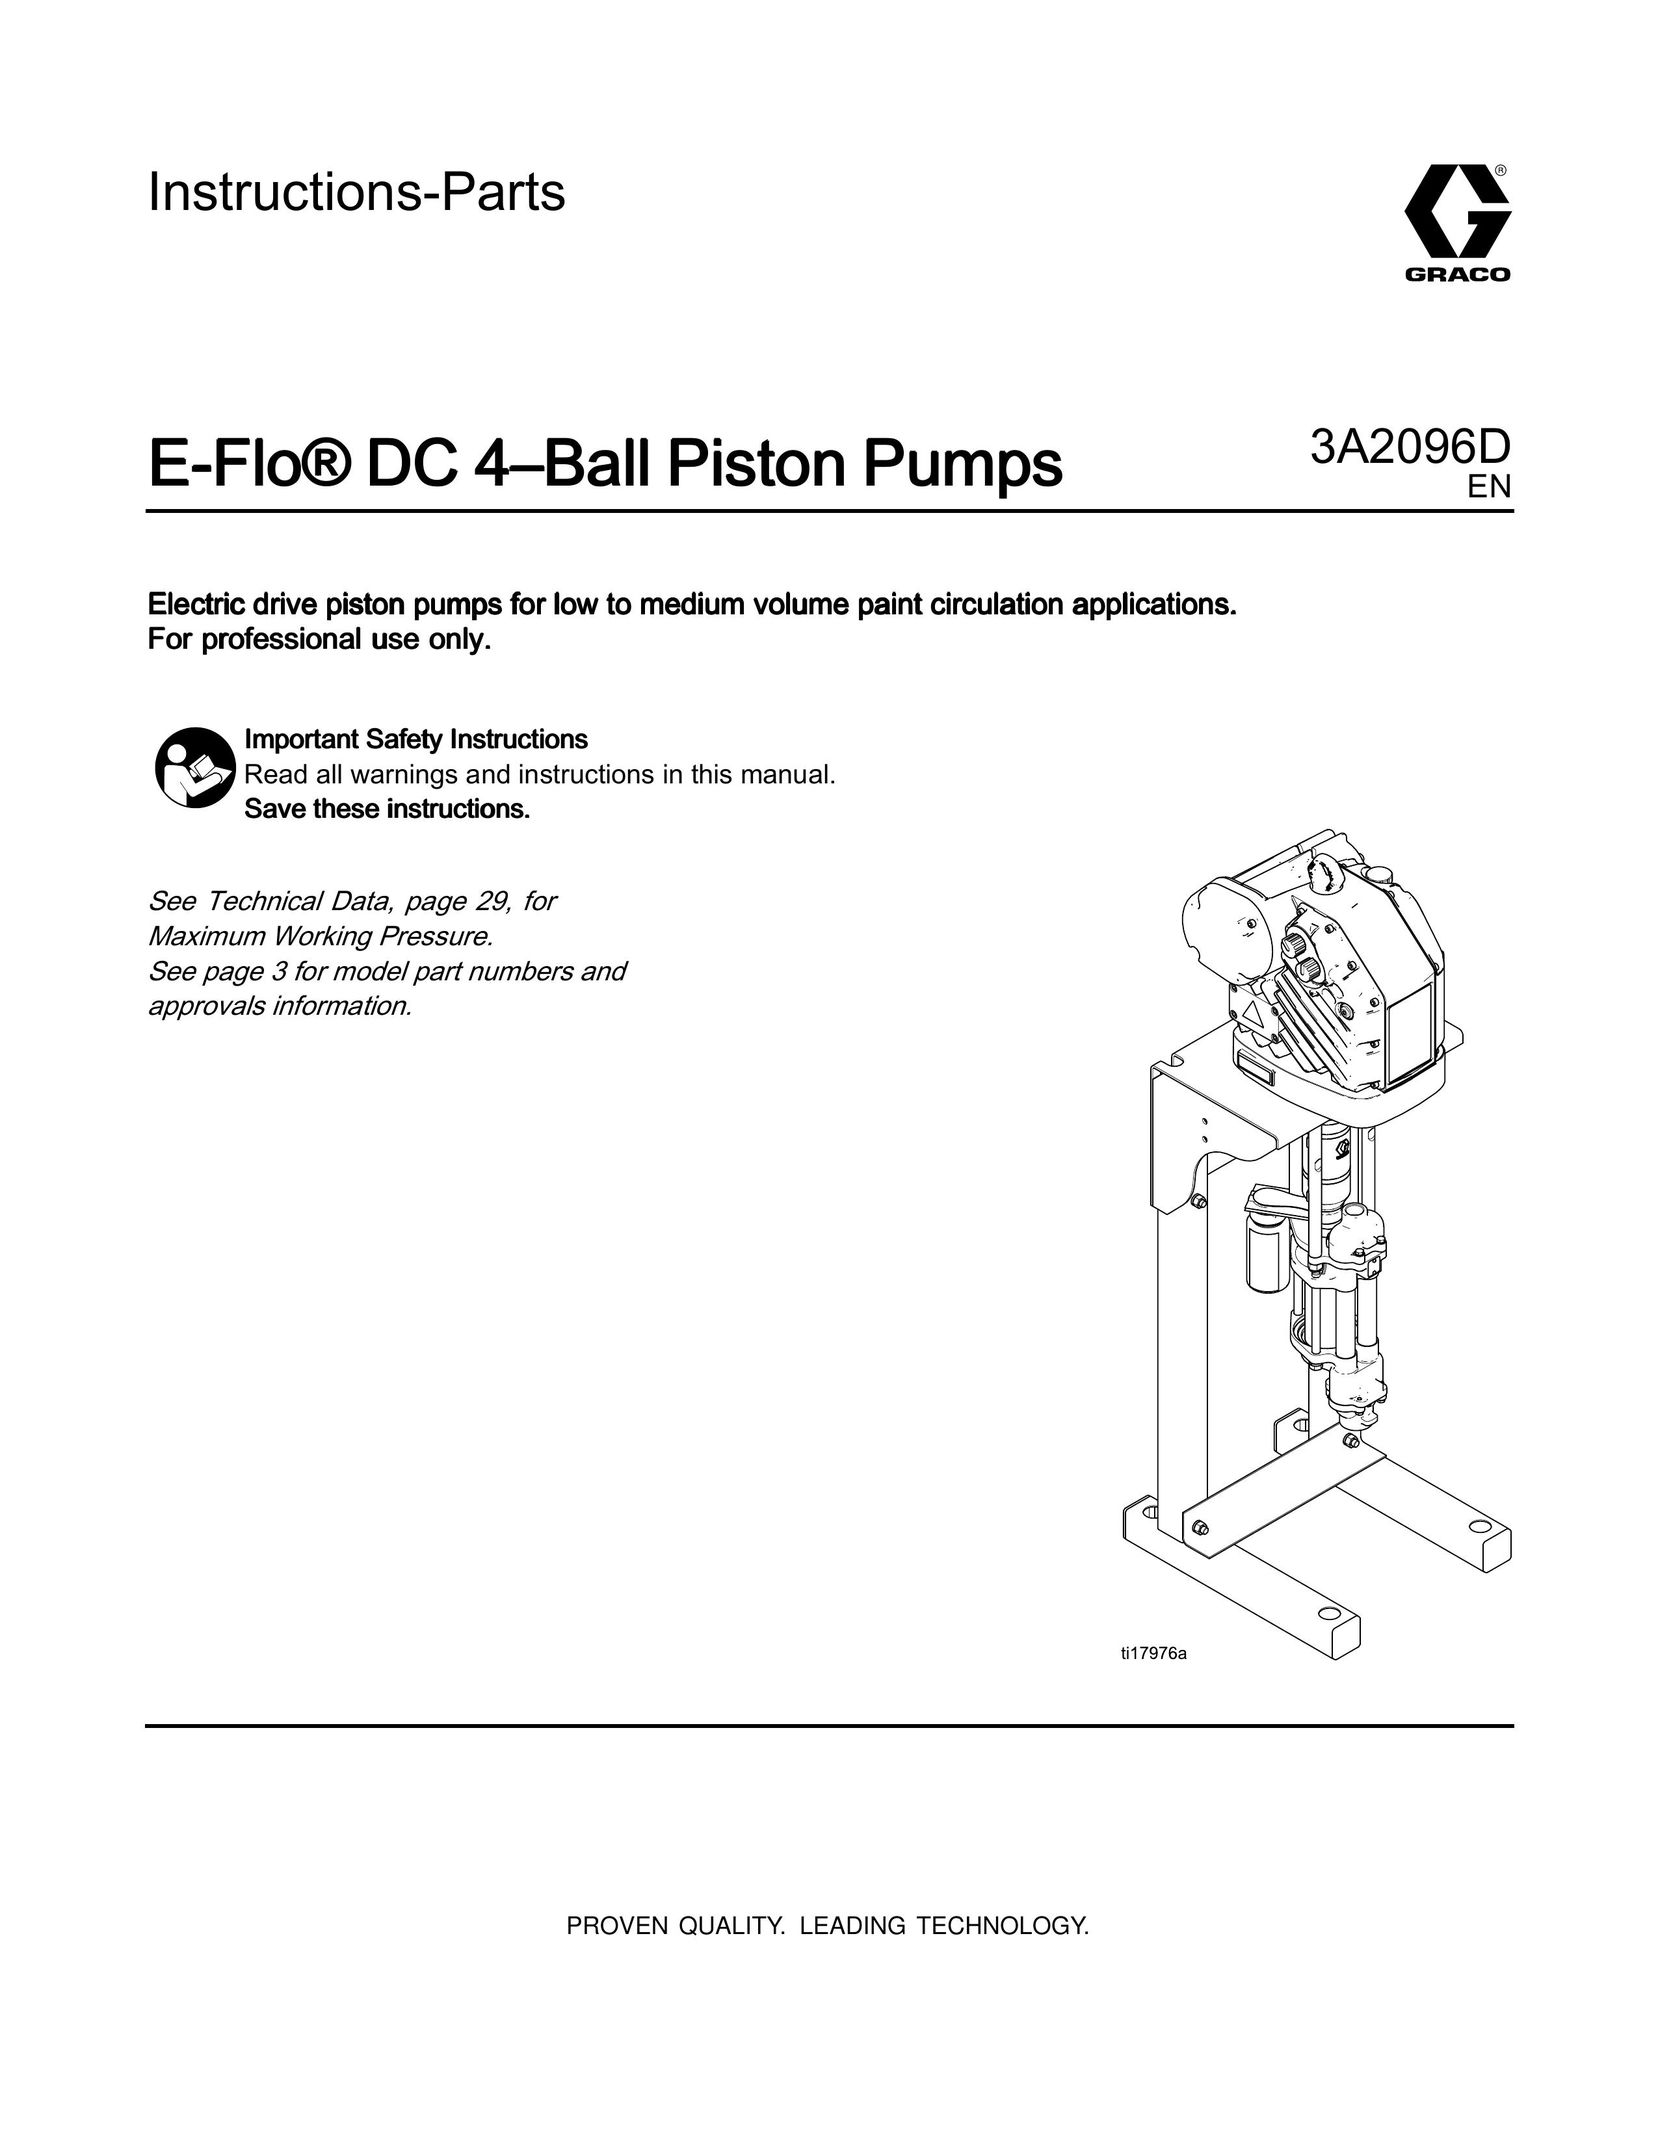 Graco 3A2096D Fitness Equipment User Manual